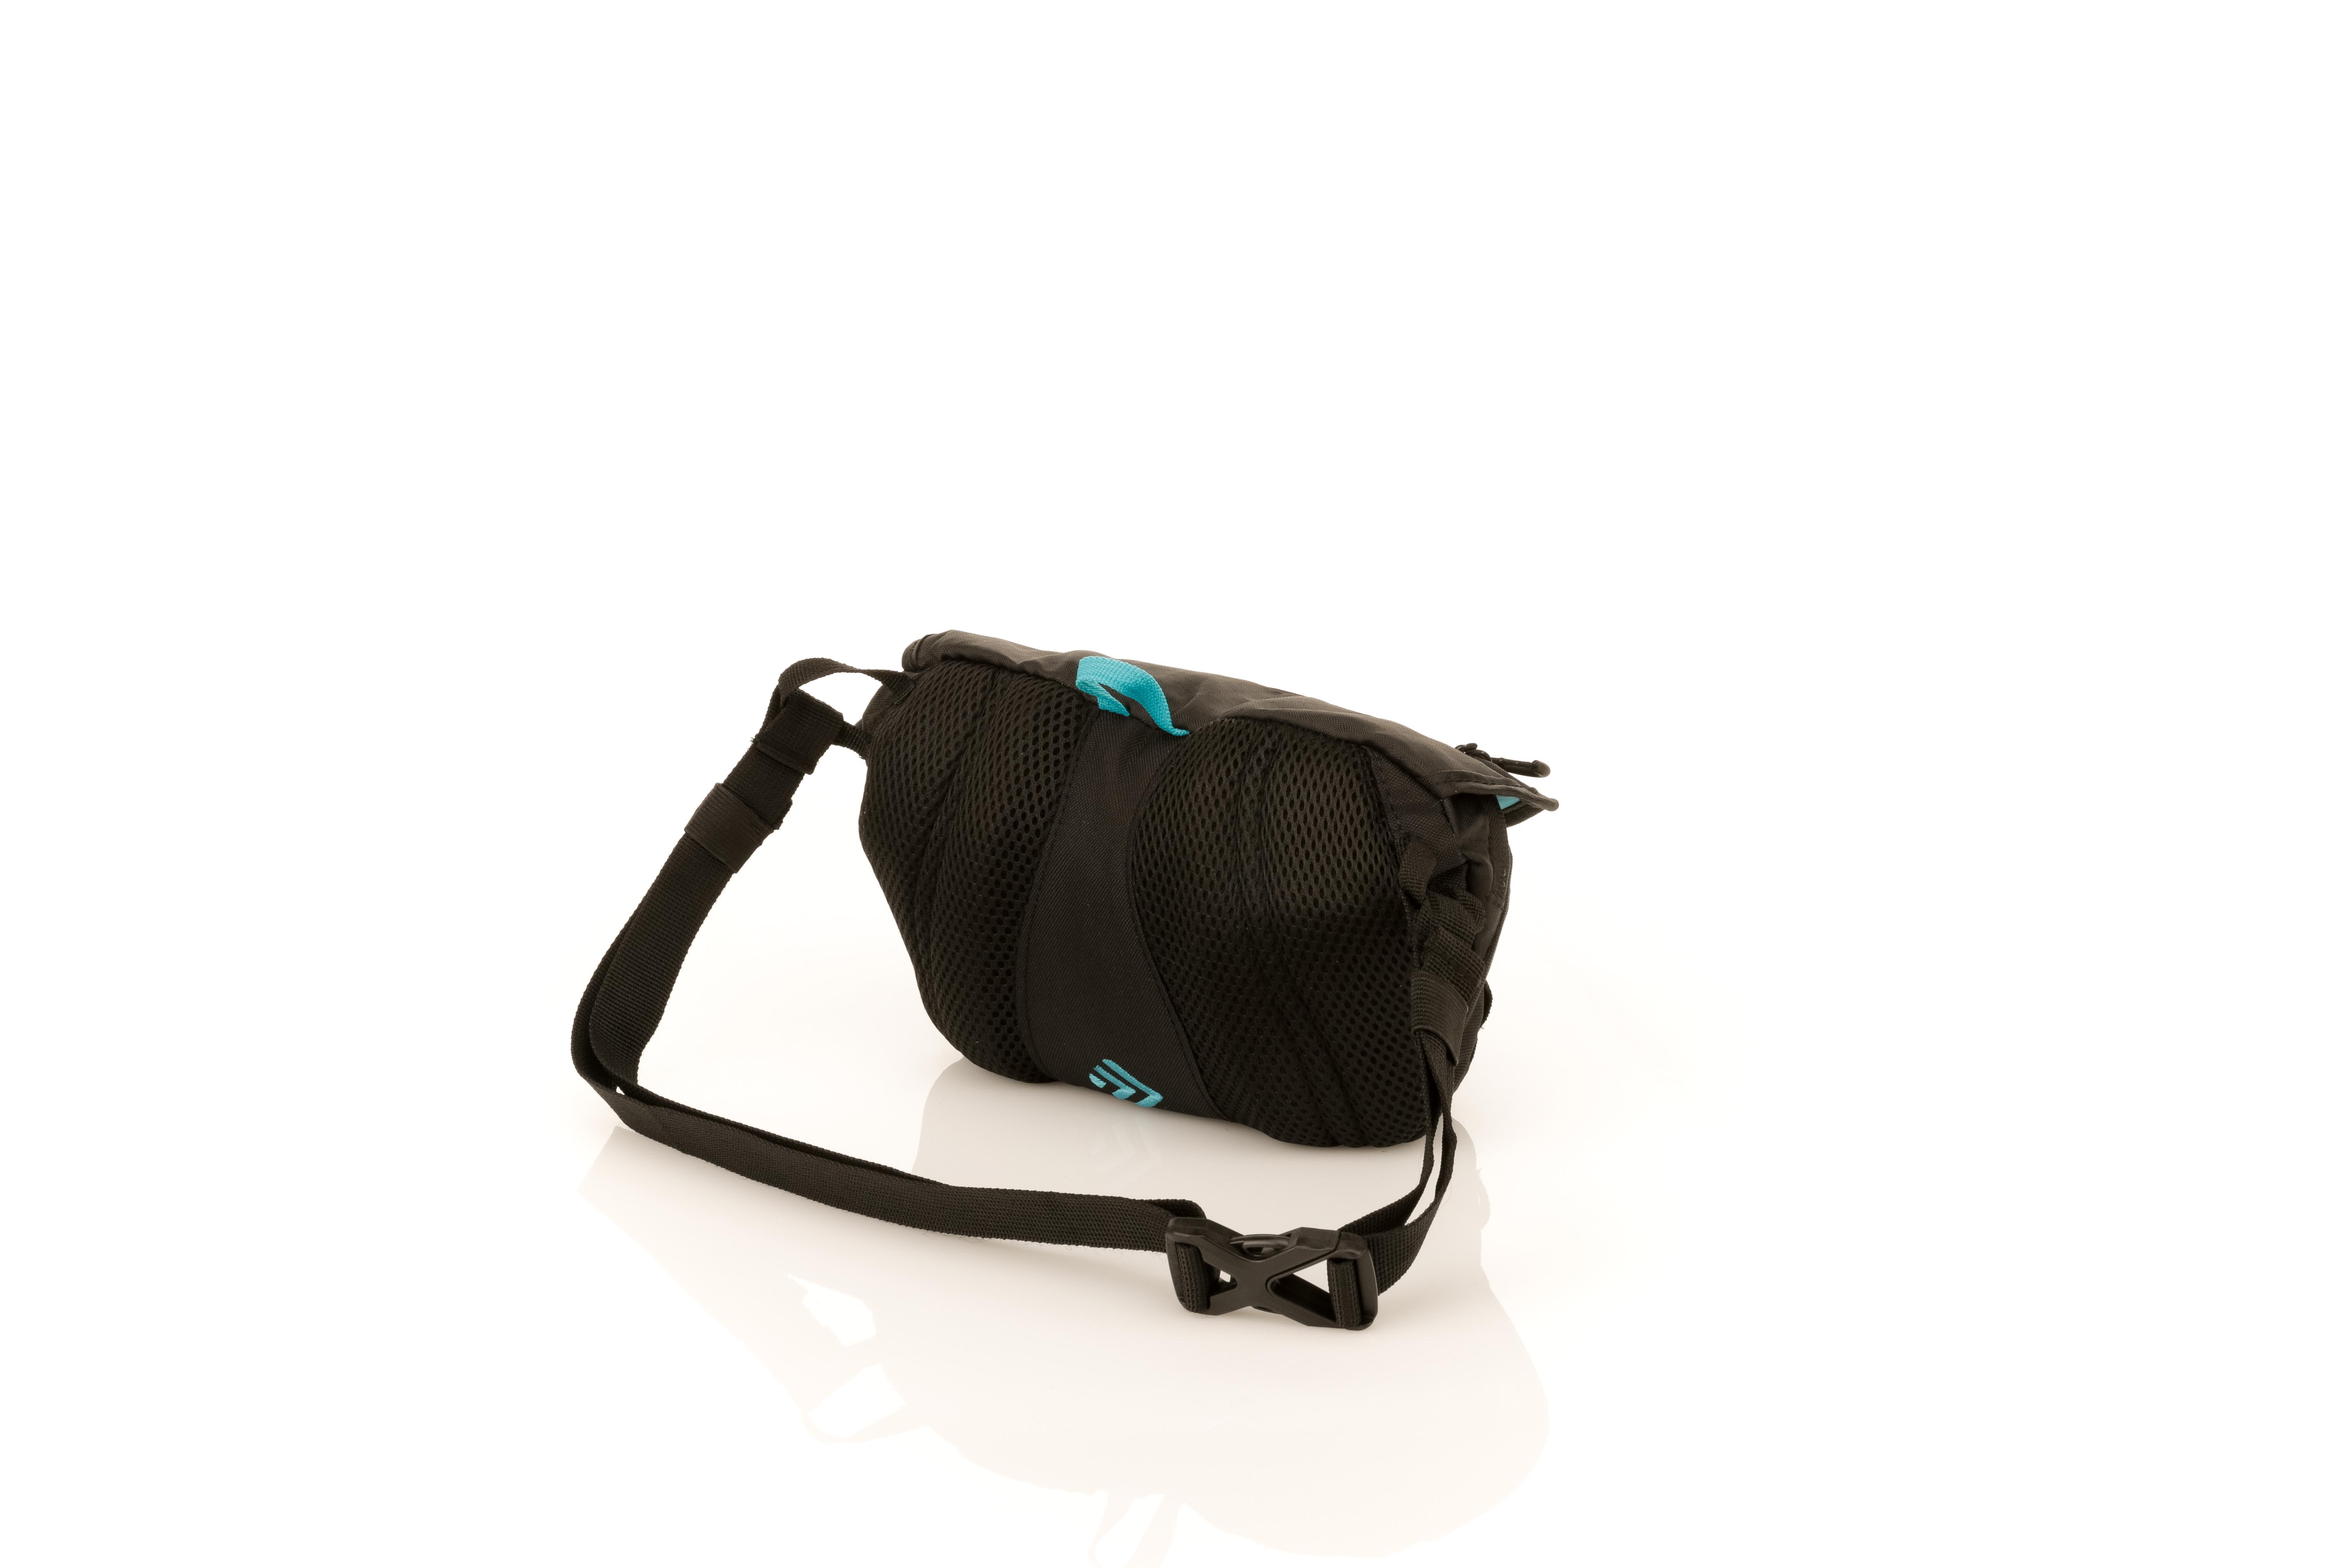 Outdoor Products Marilyn Waist Pack Sling — CampSaver